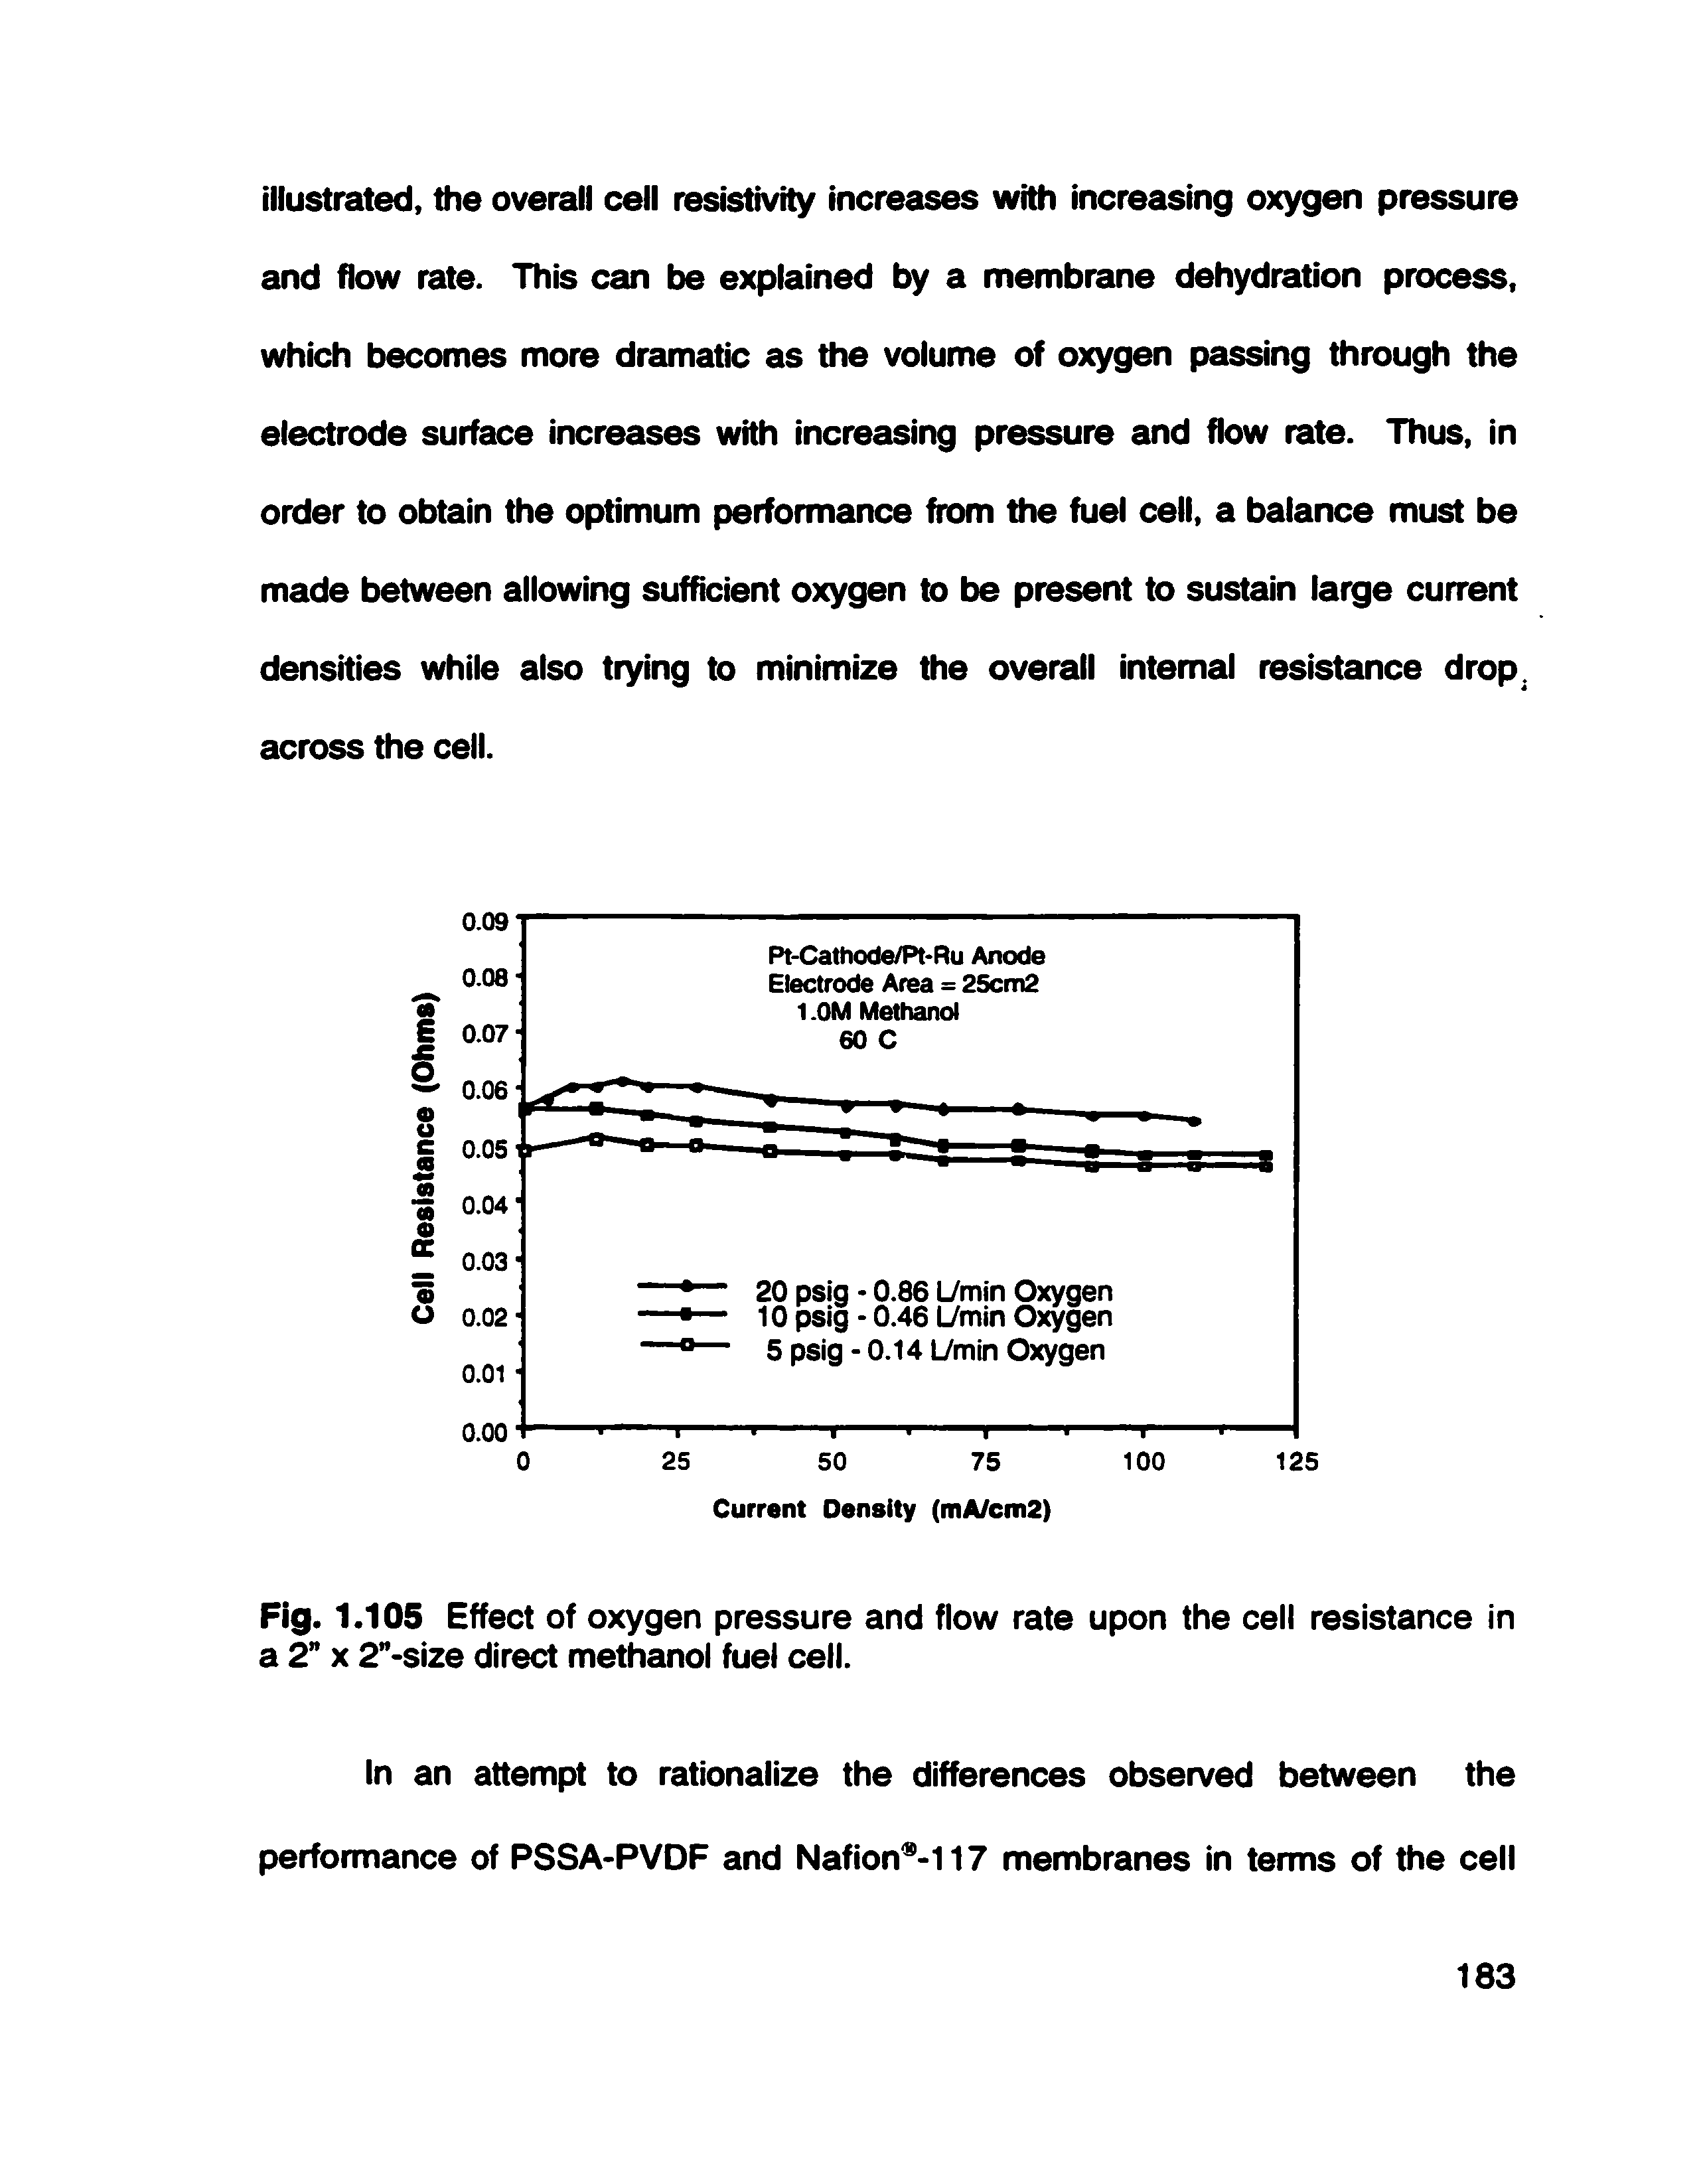 Fig. 1.105 Effect of oxygen pressure and flow rate upon the cell resistance in a 2 X 2"-size direct methanol fuel cell.